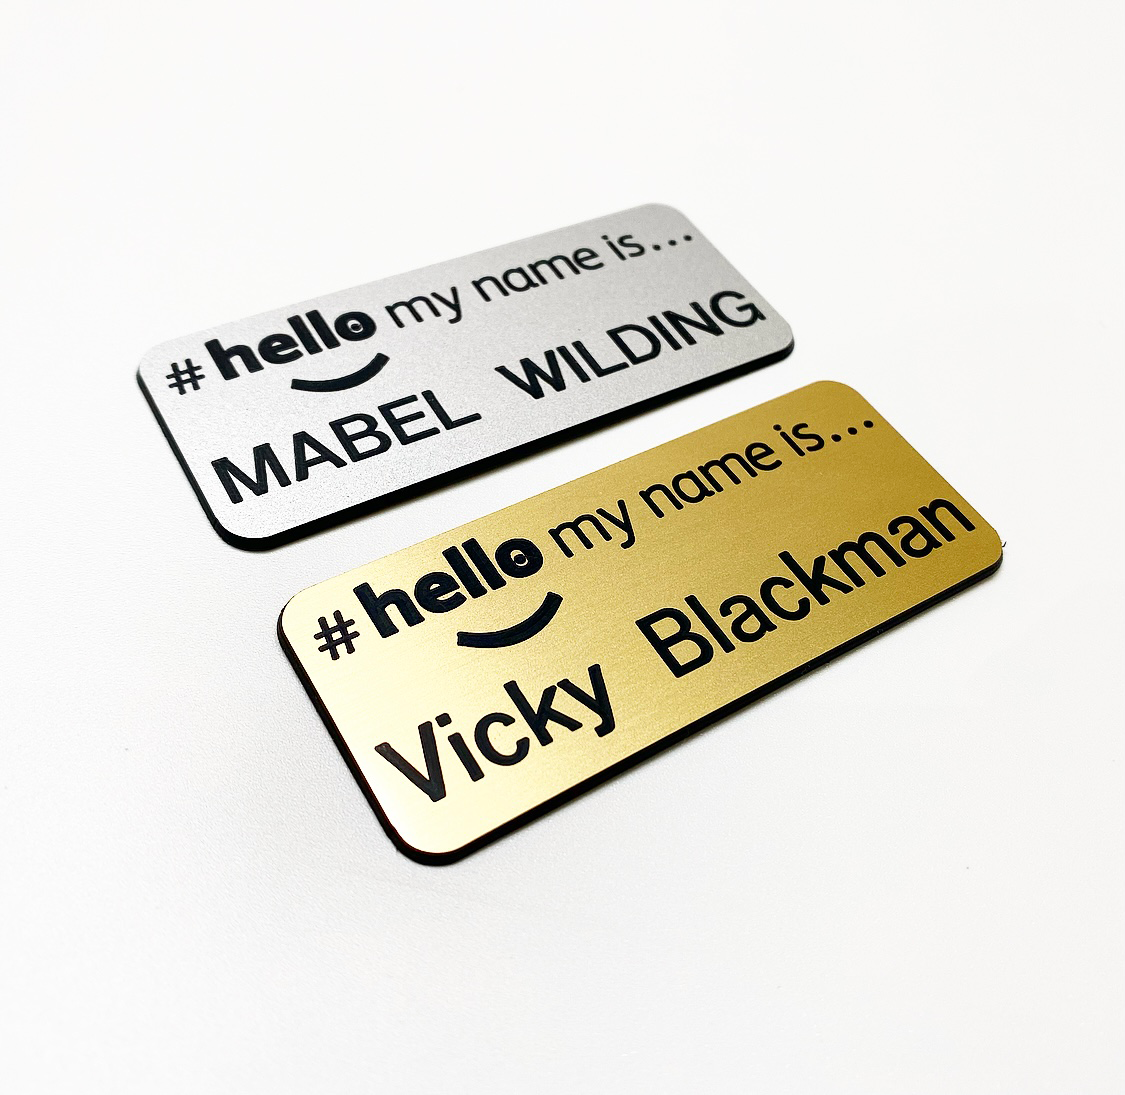 Engraved #Hello My Name is badges